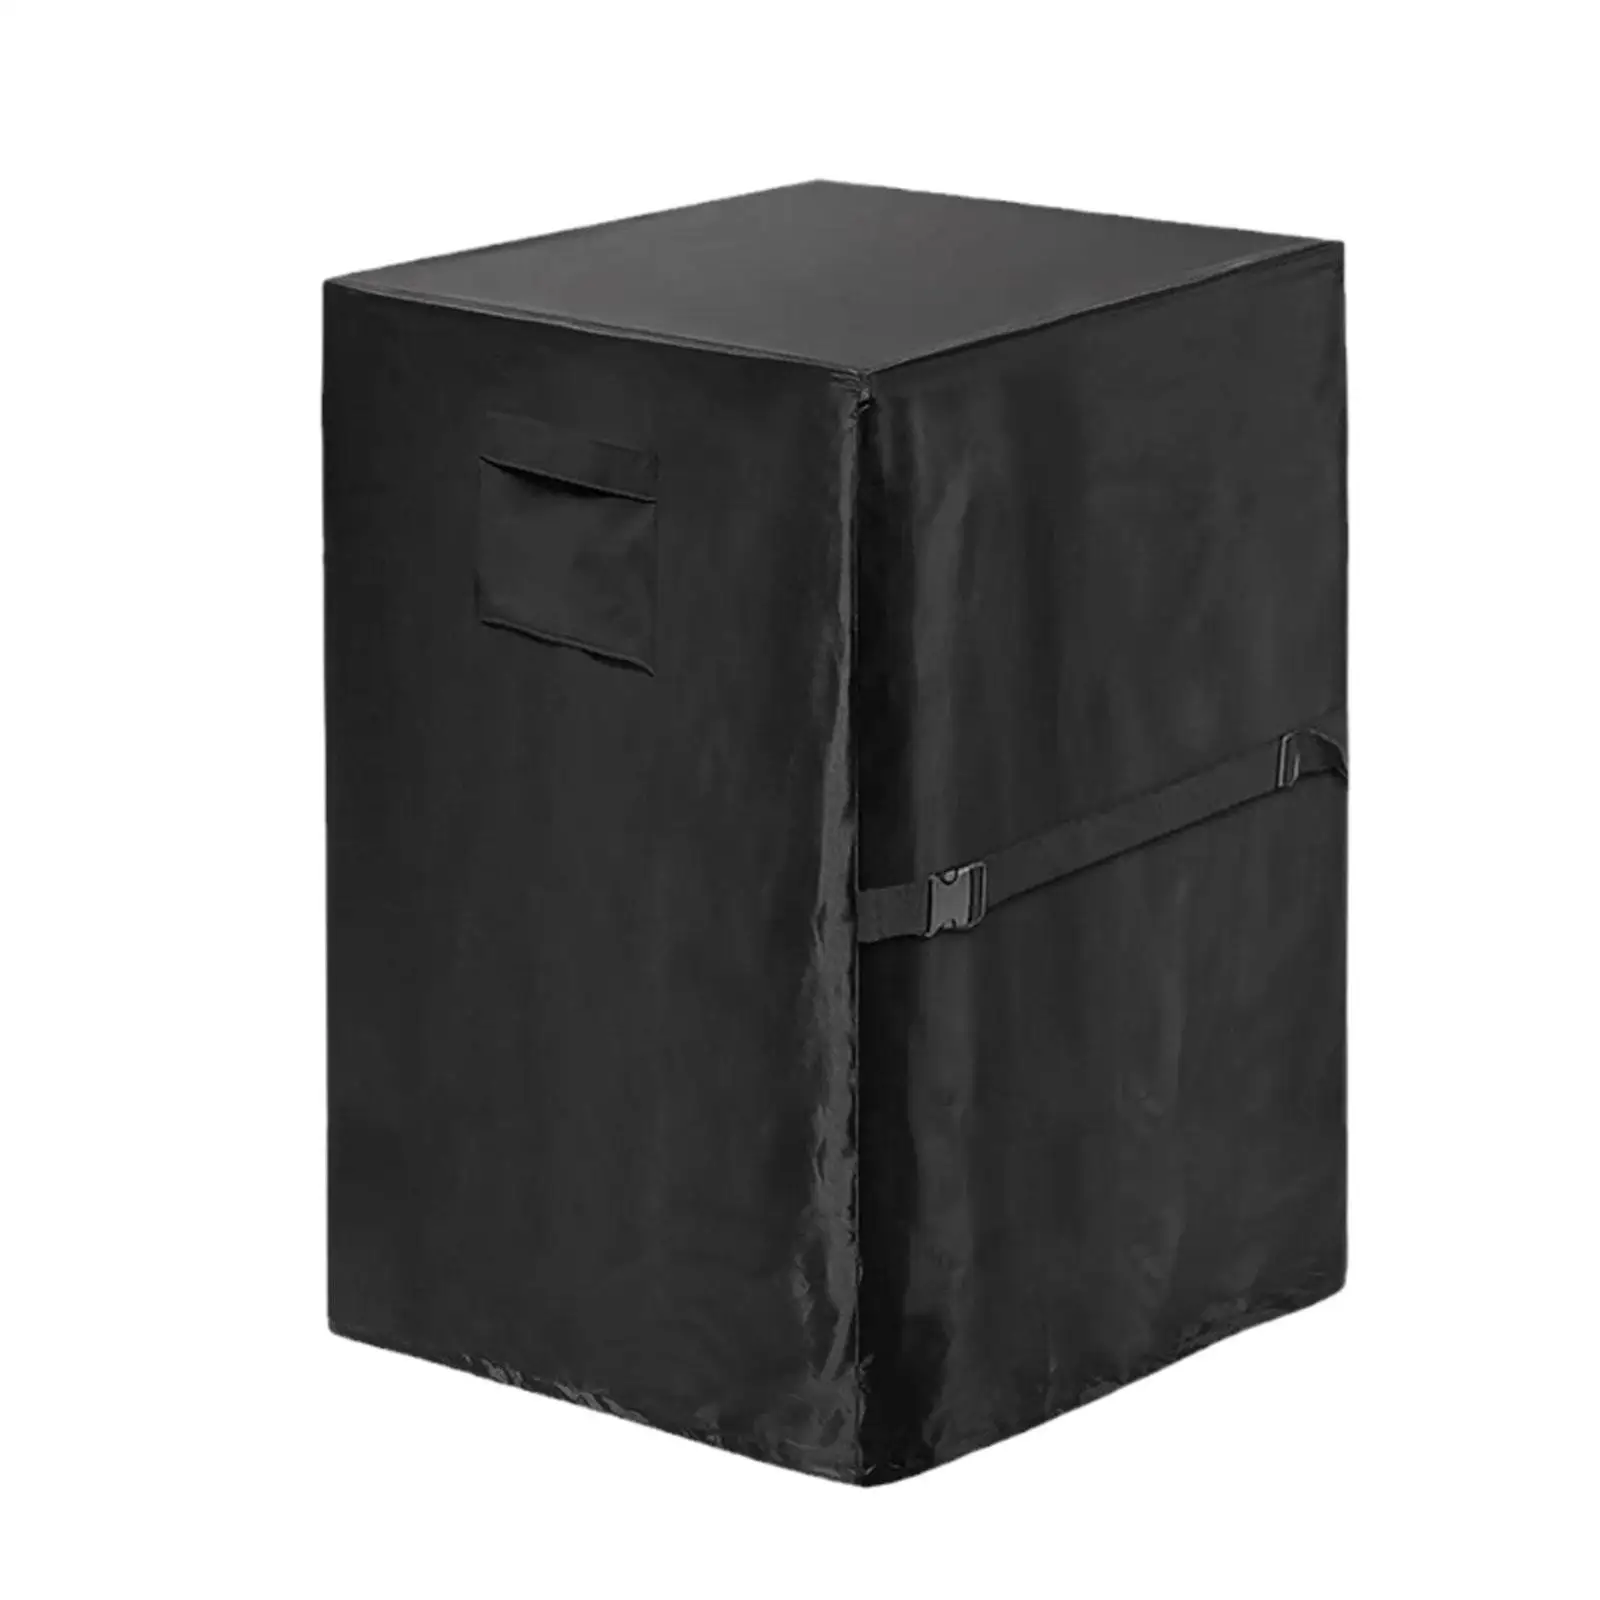 Fire Pit Cover Thickened Waterproof Fireplace Dust Cover Dustproof Square Outdoor Firepit Cover for Garden Outside Lawn Porch